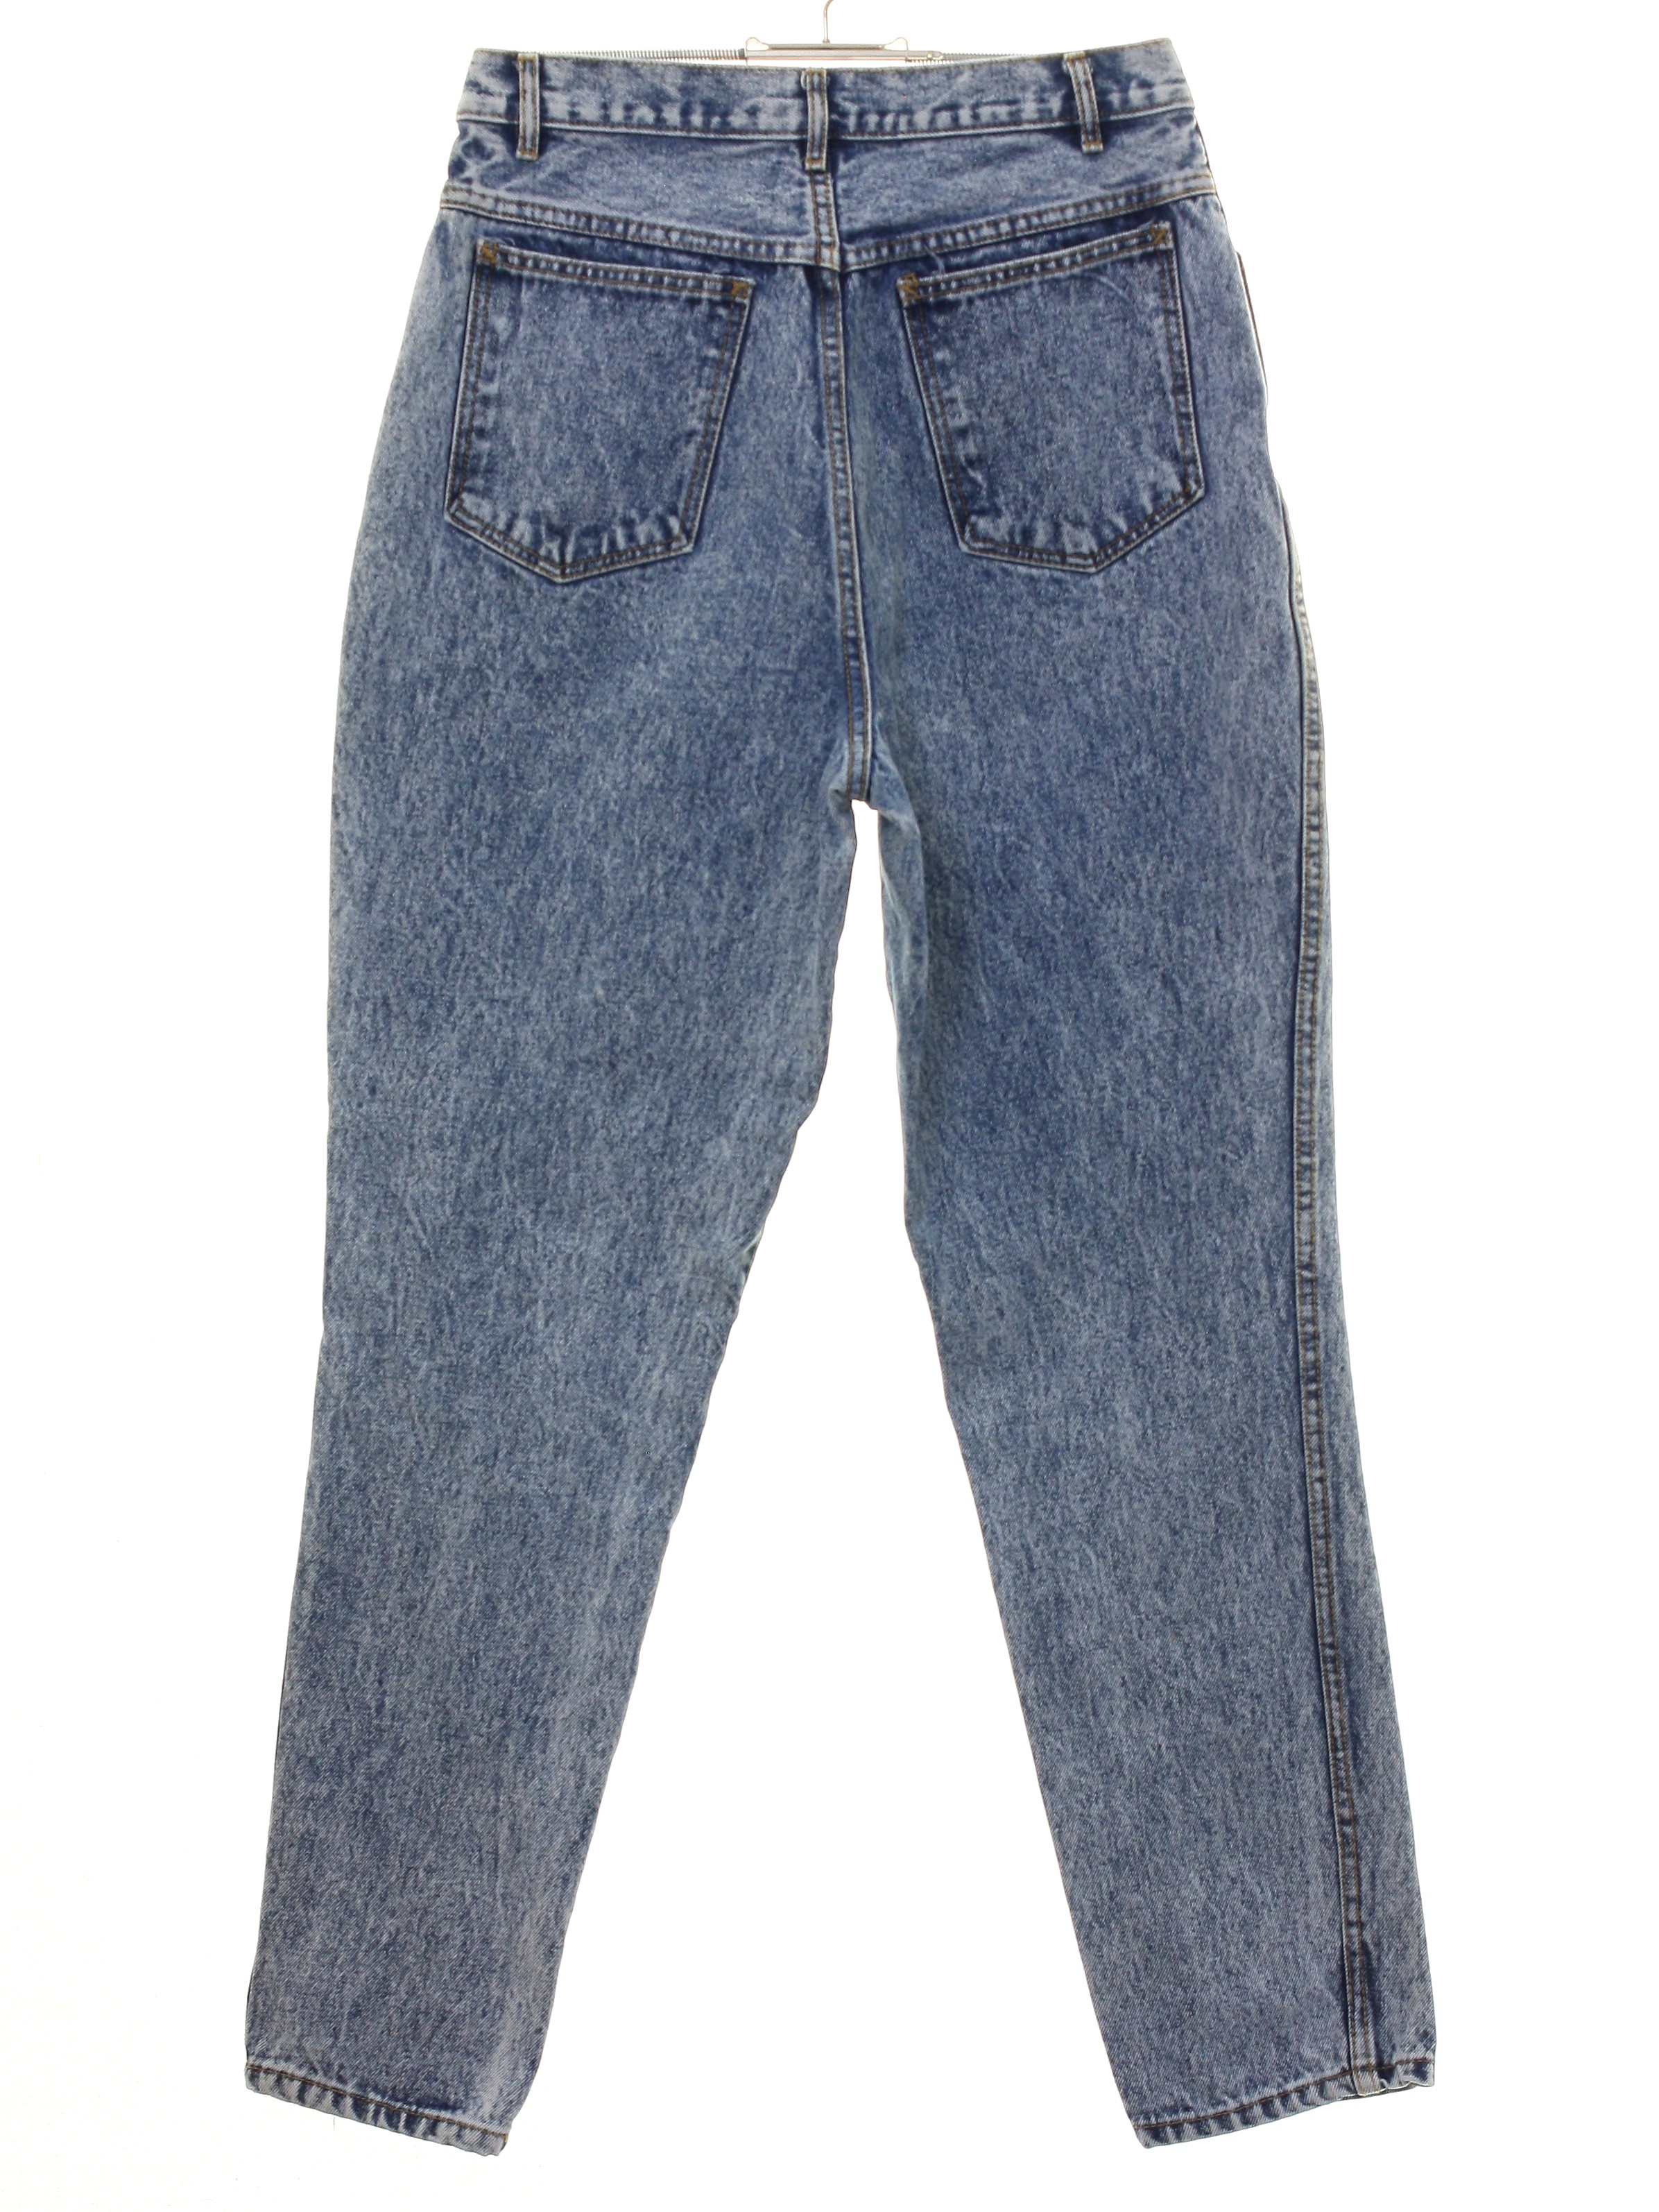 Vintage Rio Eighties Pants: 80s -Rio- Womens acid washed blue cotton ...